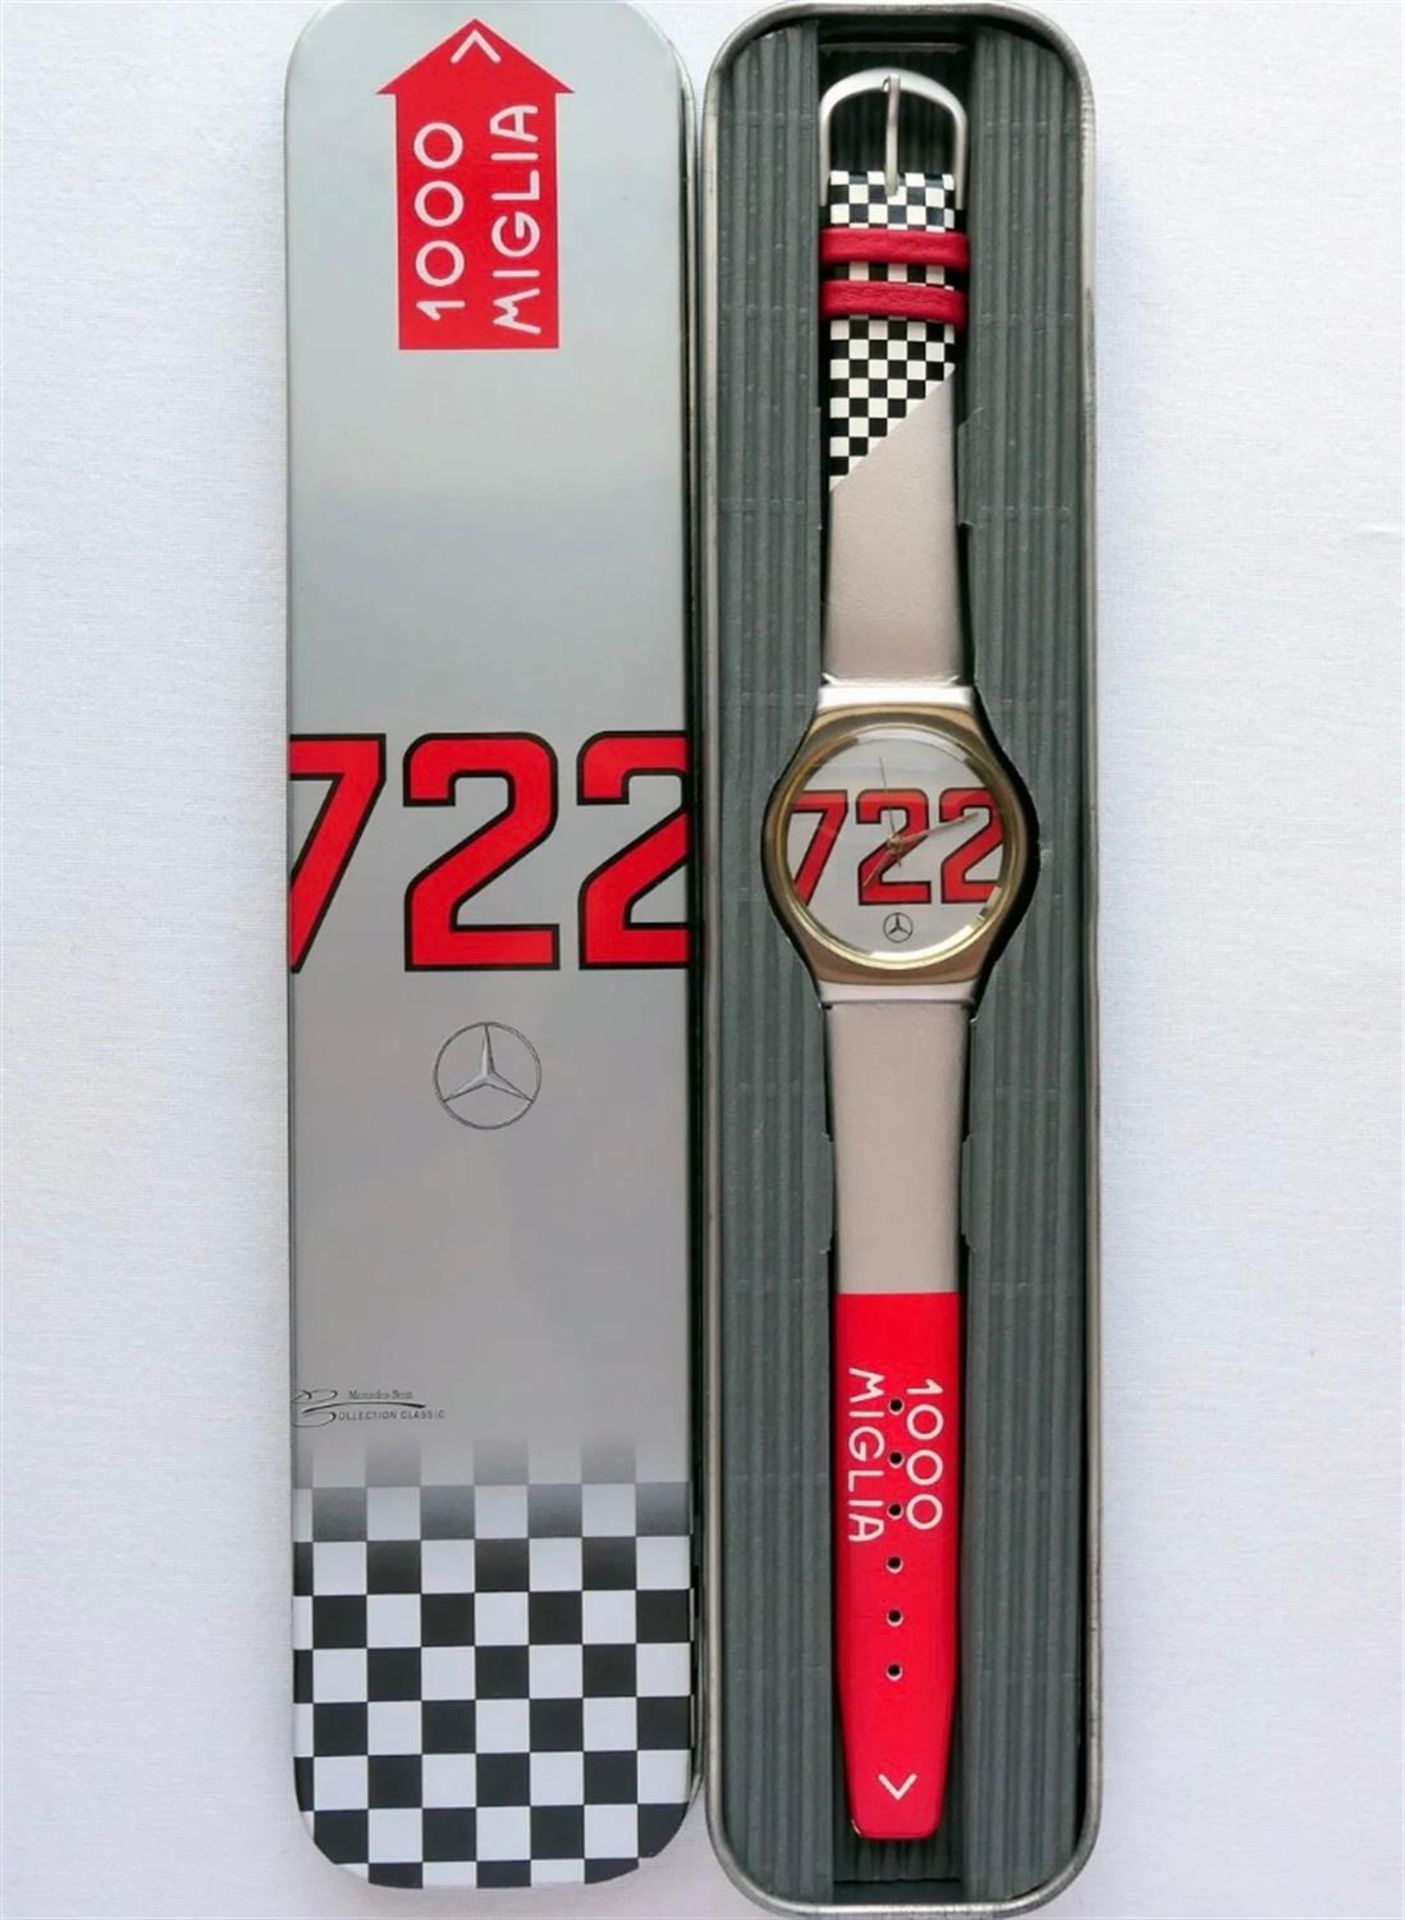 A Rare and Genuine Mercedes-Benz 722 Mille Miglia Classic Racing Watch - Image 9 of 10